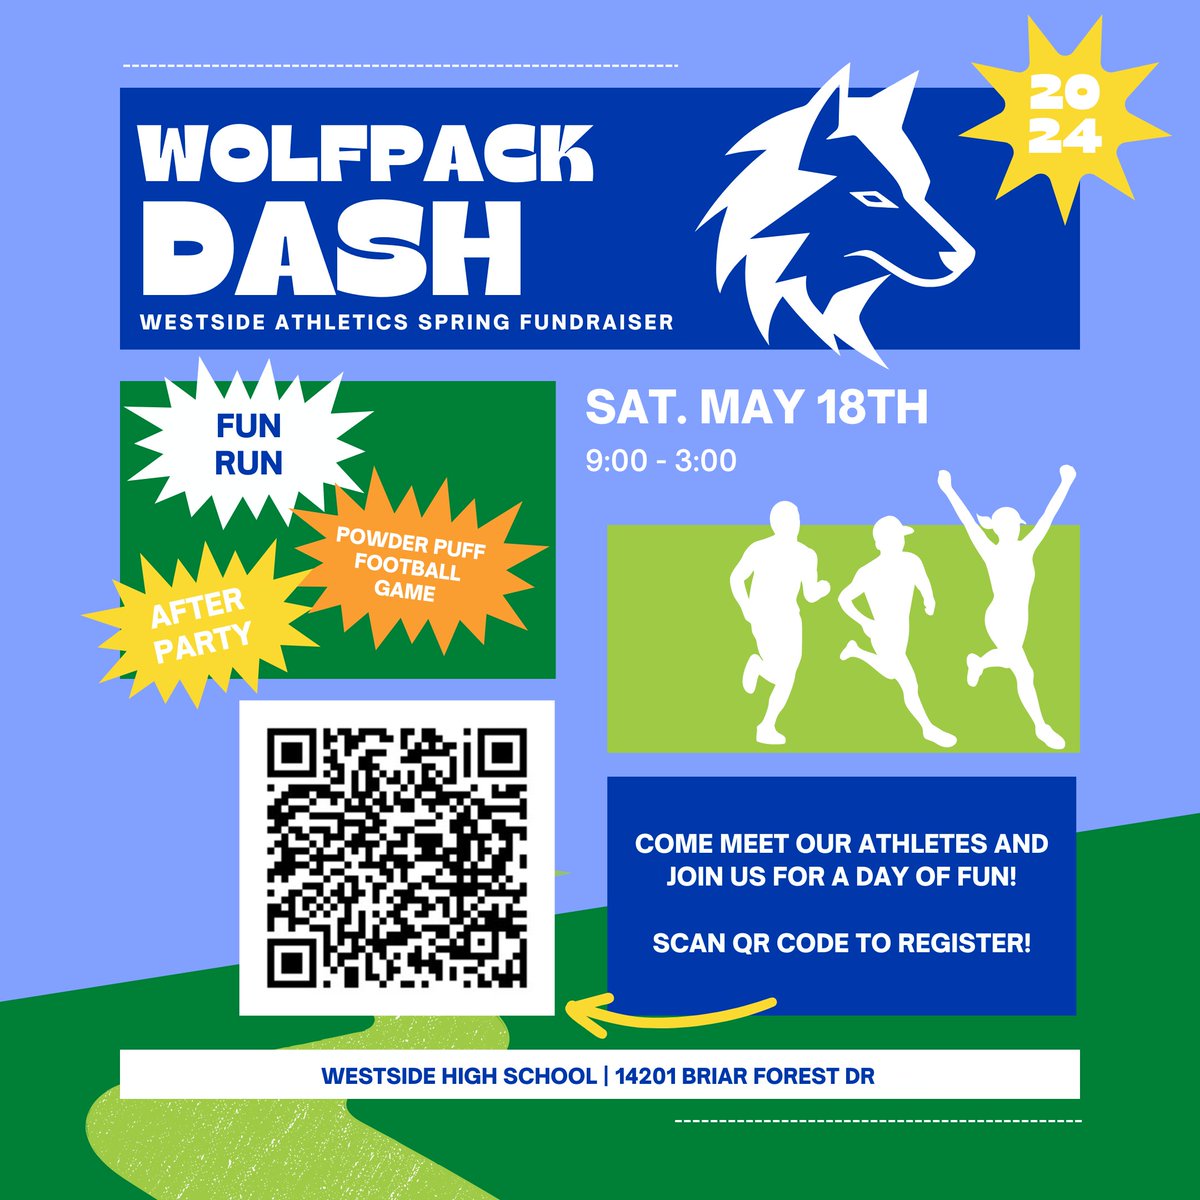 Westside Athletics hosting a Spring Day Event! THE WOLFPACK DASH! 
3 mile Fun Run/Walk
After party in the Quad (Games/music/food/fun)
Powder Puff Game in the afternoon

If you can't make it but would like to help, please purchase tickets! Thank you! Wolf Up!